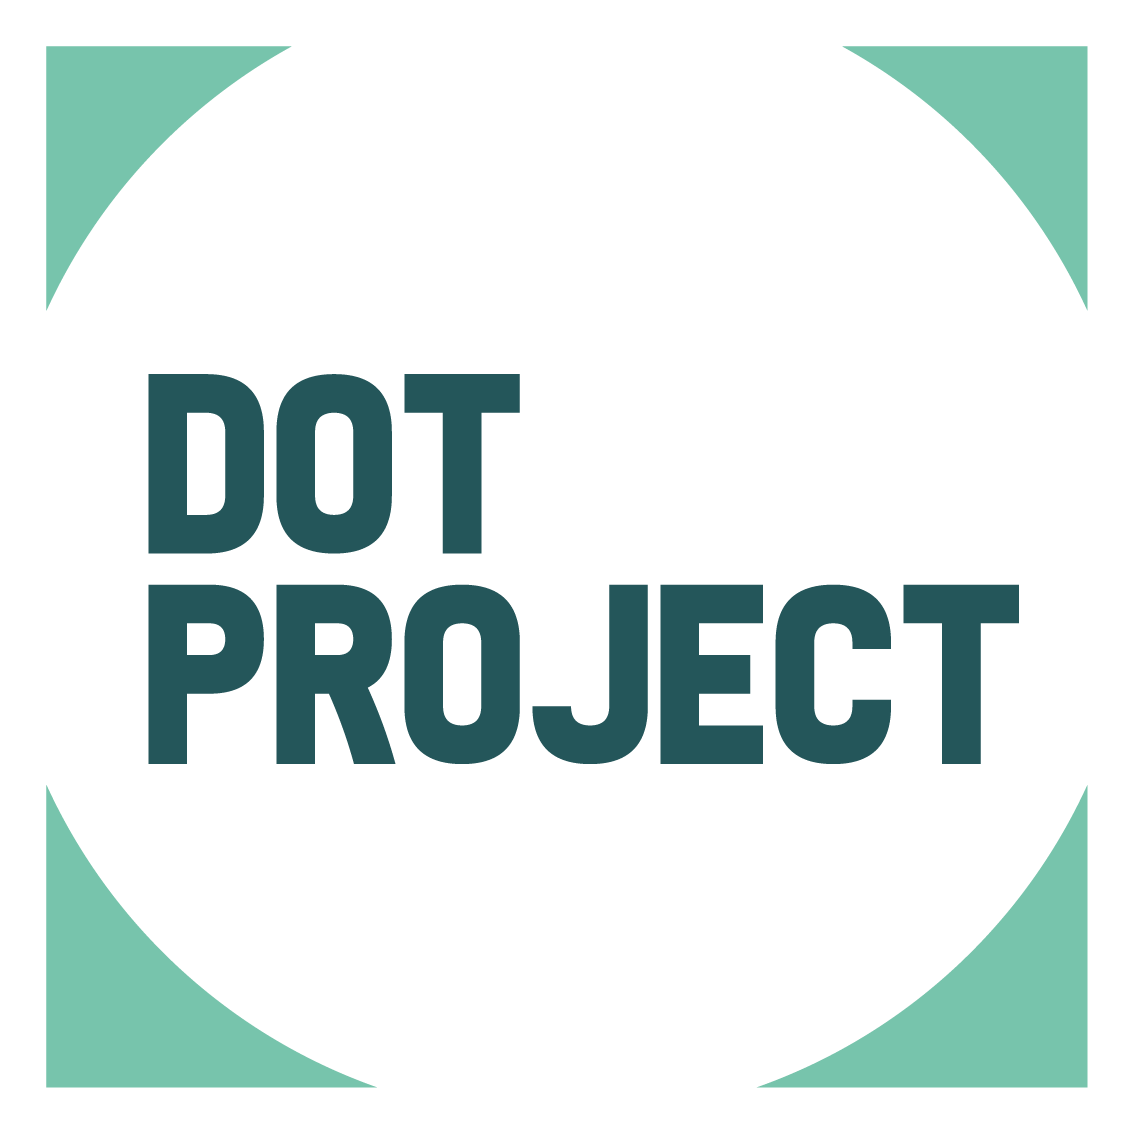 DOT PROJECT